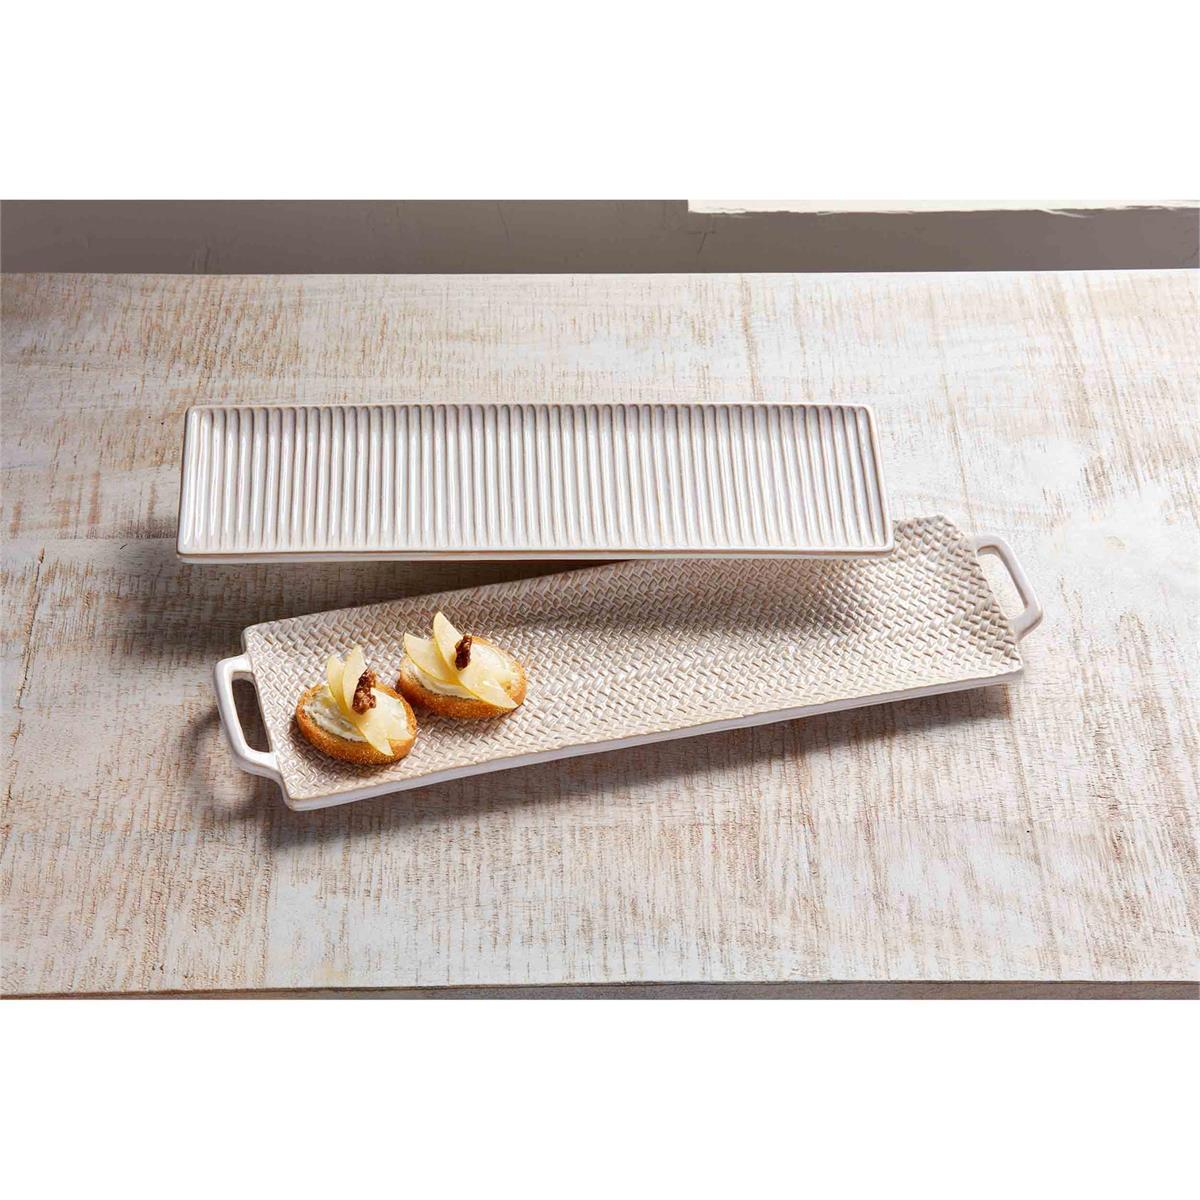 small tray with ribbed lines and large tray with handles and woven pattern arranged on a wooden table with snacks on the larger tray.